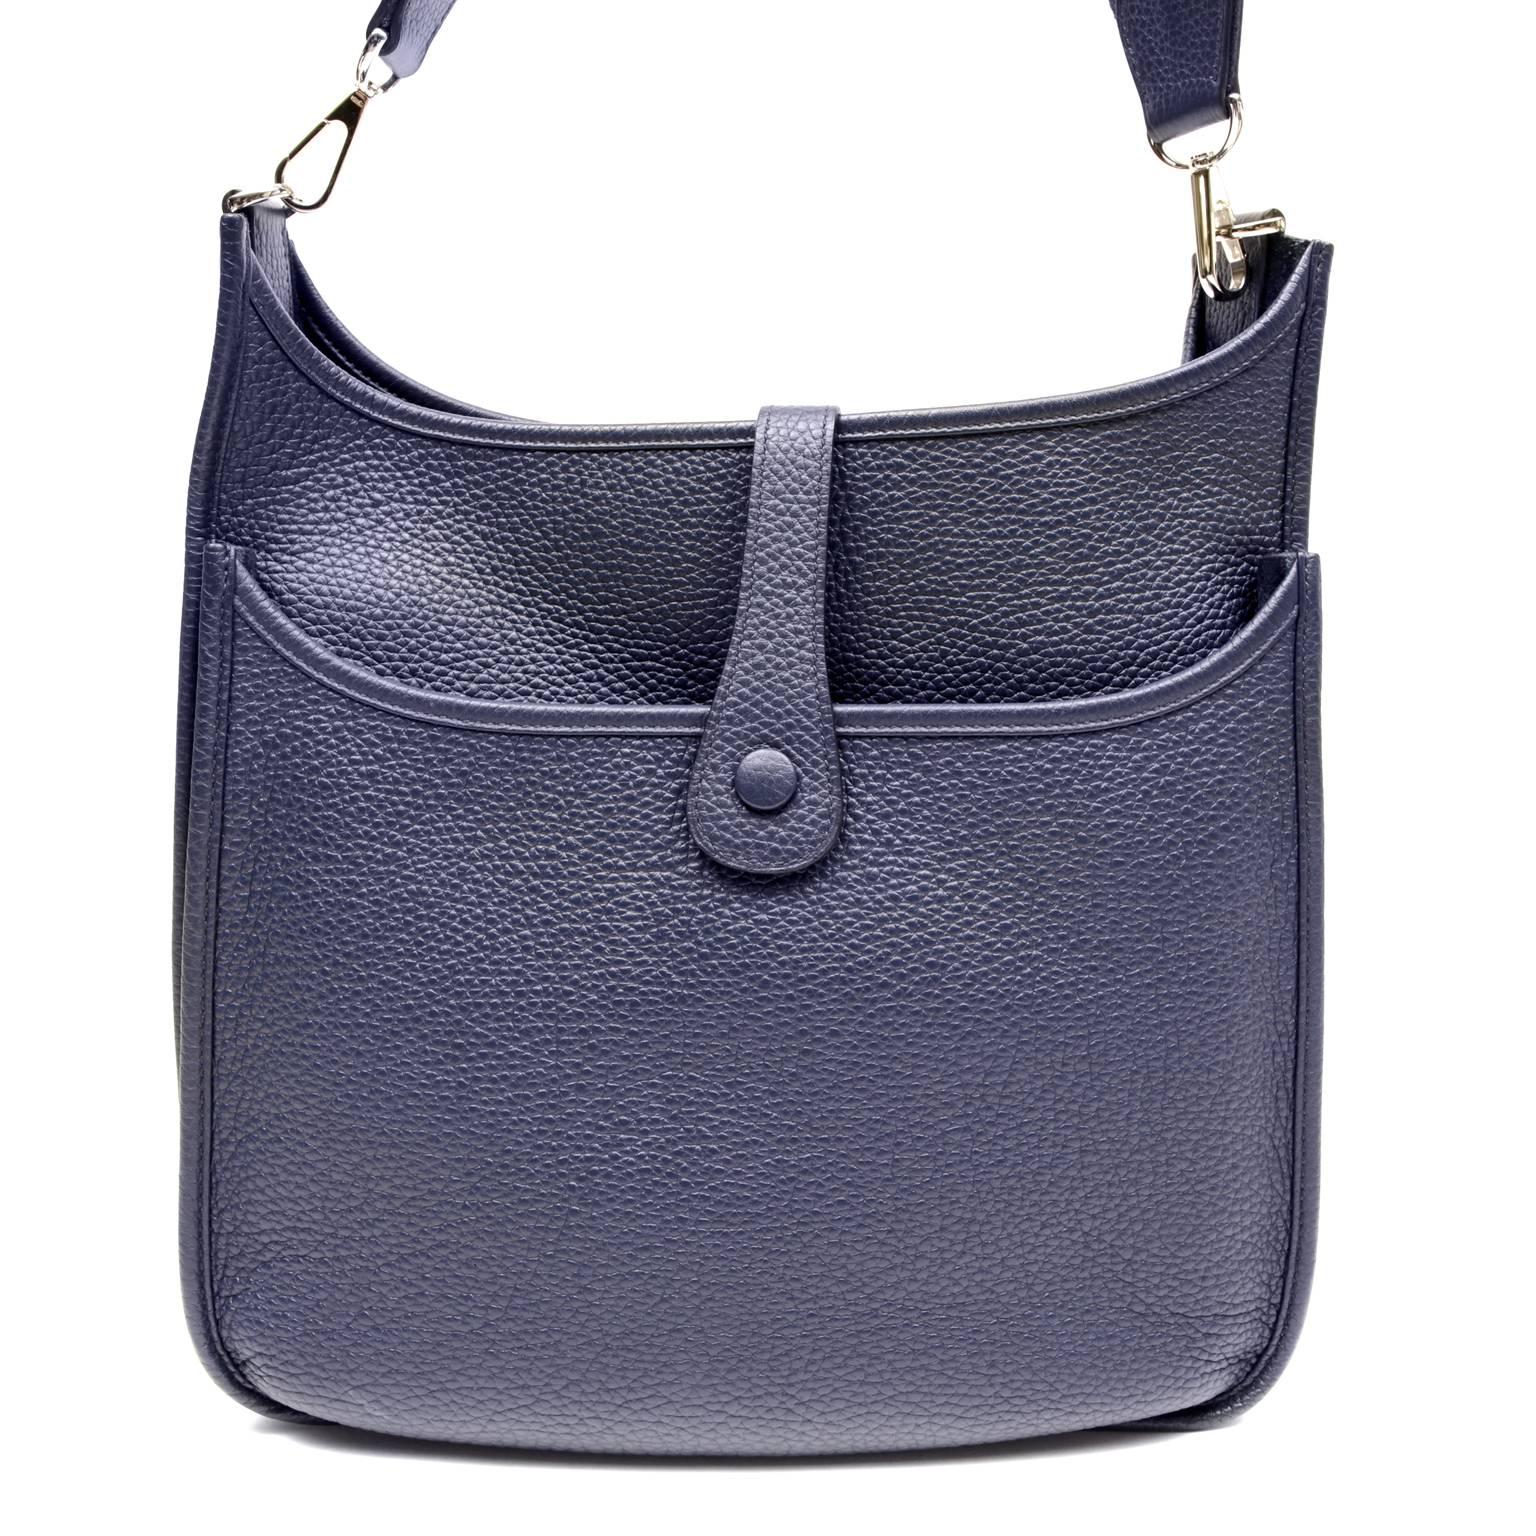 Authentic Hermès Blue Colvert Evelyne III GM - Pristine Condition
  The dark blue shade is a welcome change from basic black yet easily mingles blends with nearly any other color
The Evelyne silhouette is inspired by an equestrian groom’s tool